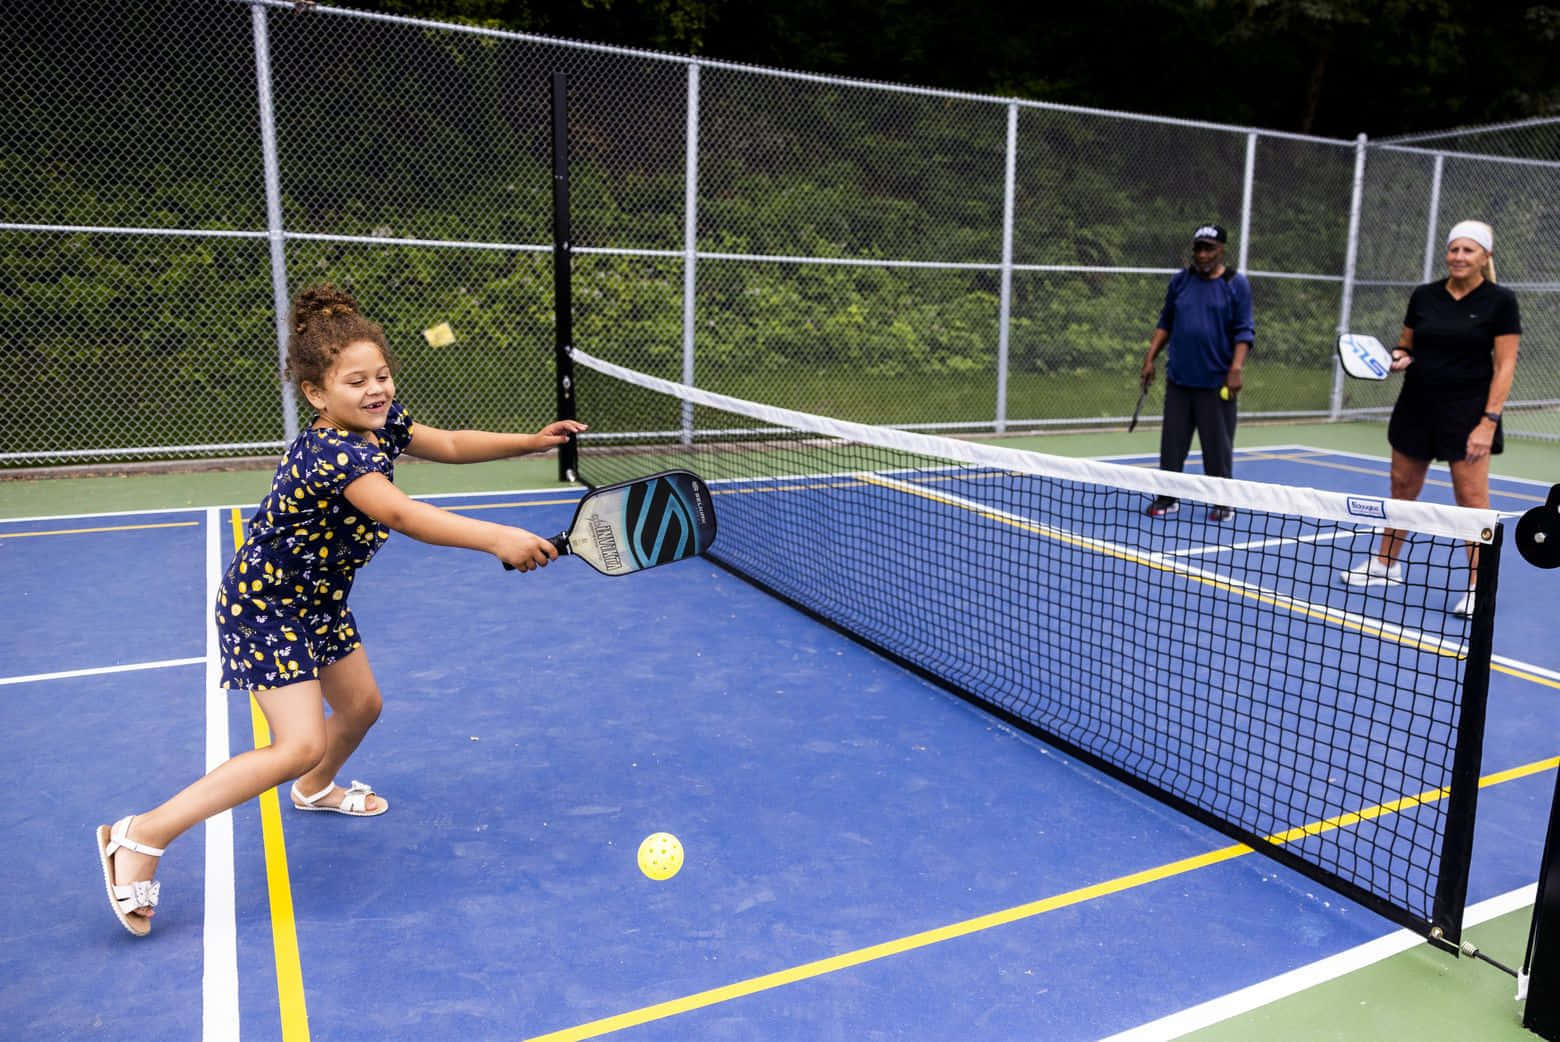 Young Girl Playing Pickleball Outdoors.jpg Wallpaper